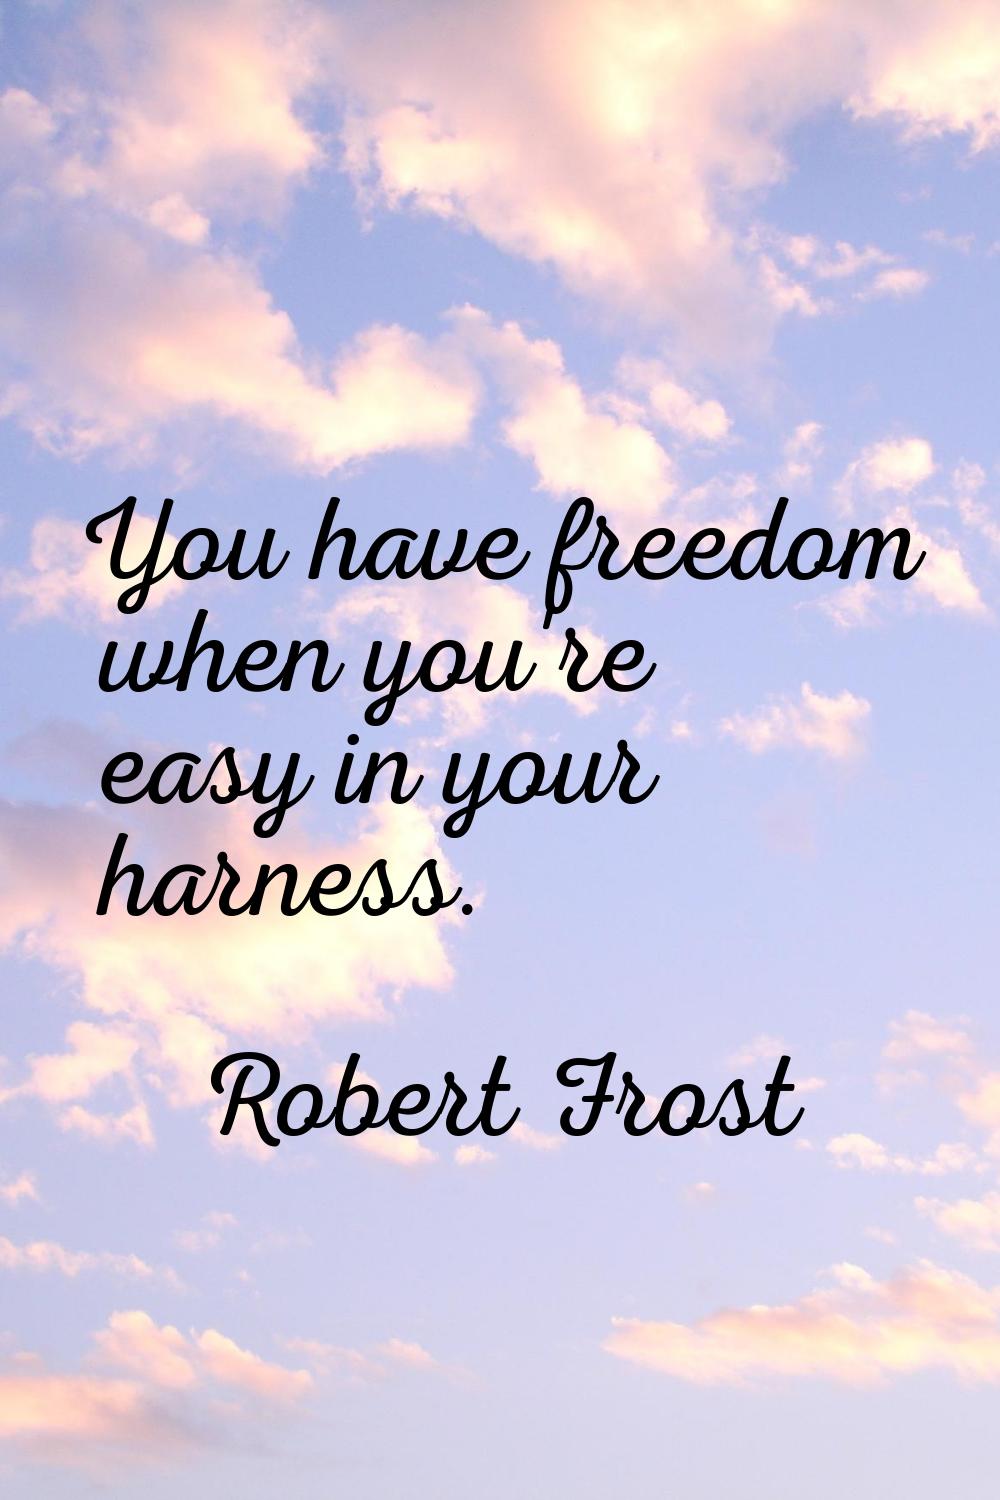 You have freedom when you're easy in your harness.